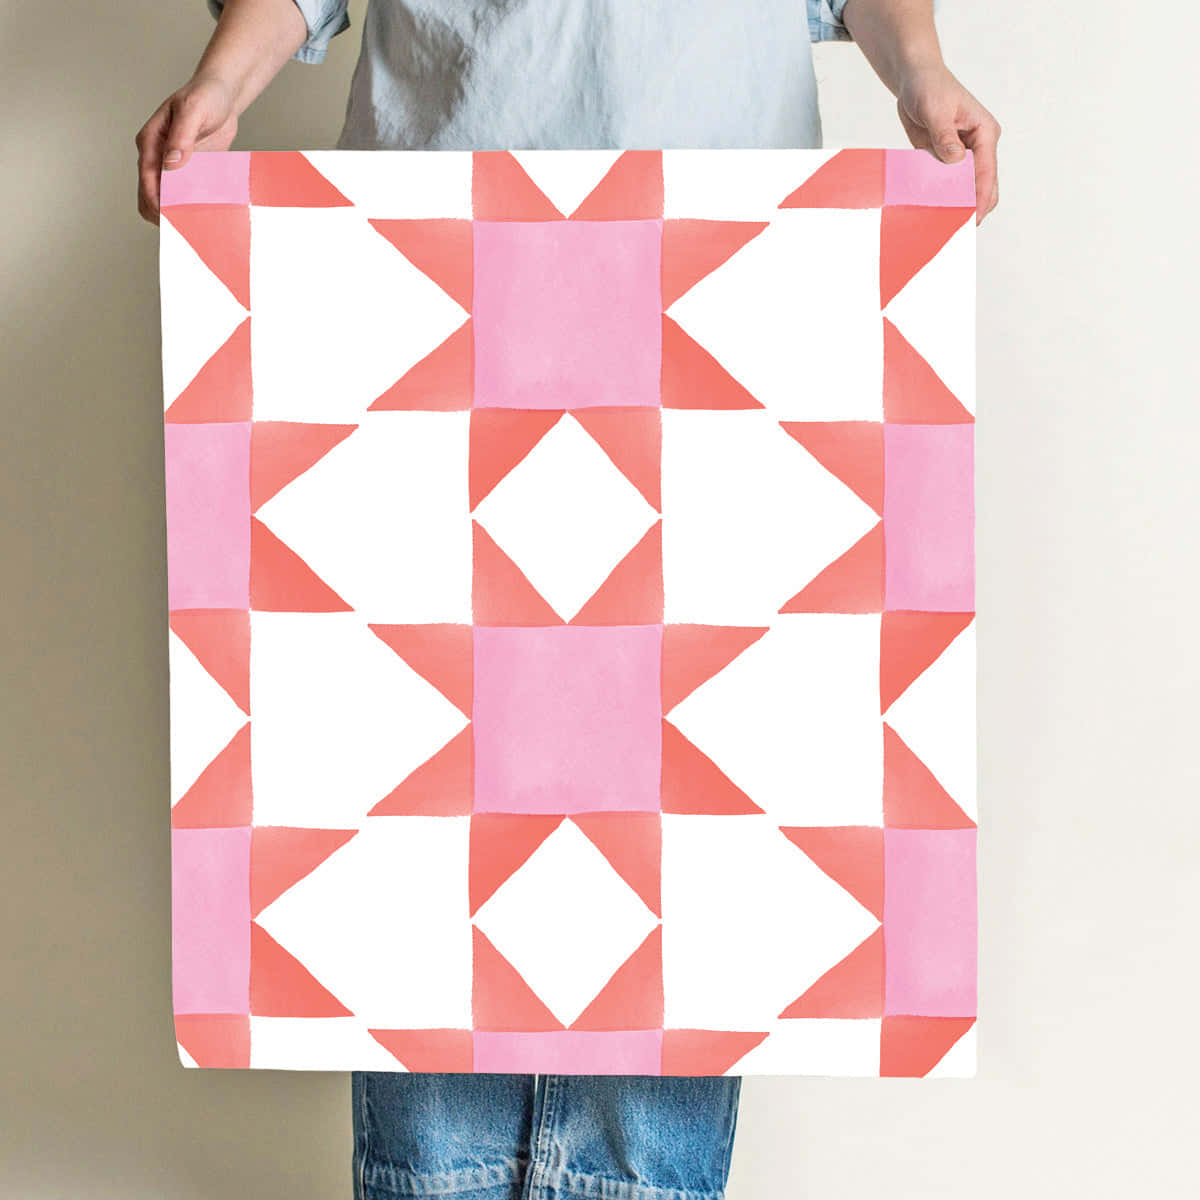 A Woman Holding Up A Pink And White Quilt Wallpaper